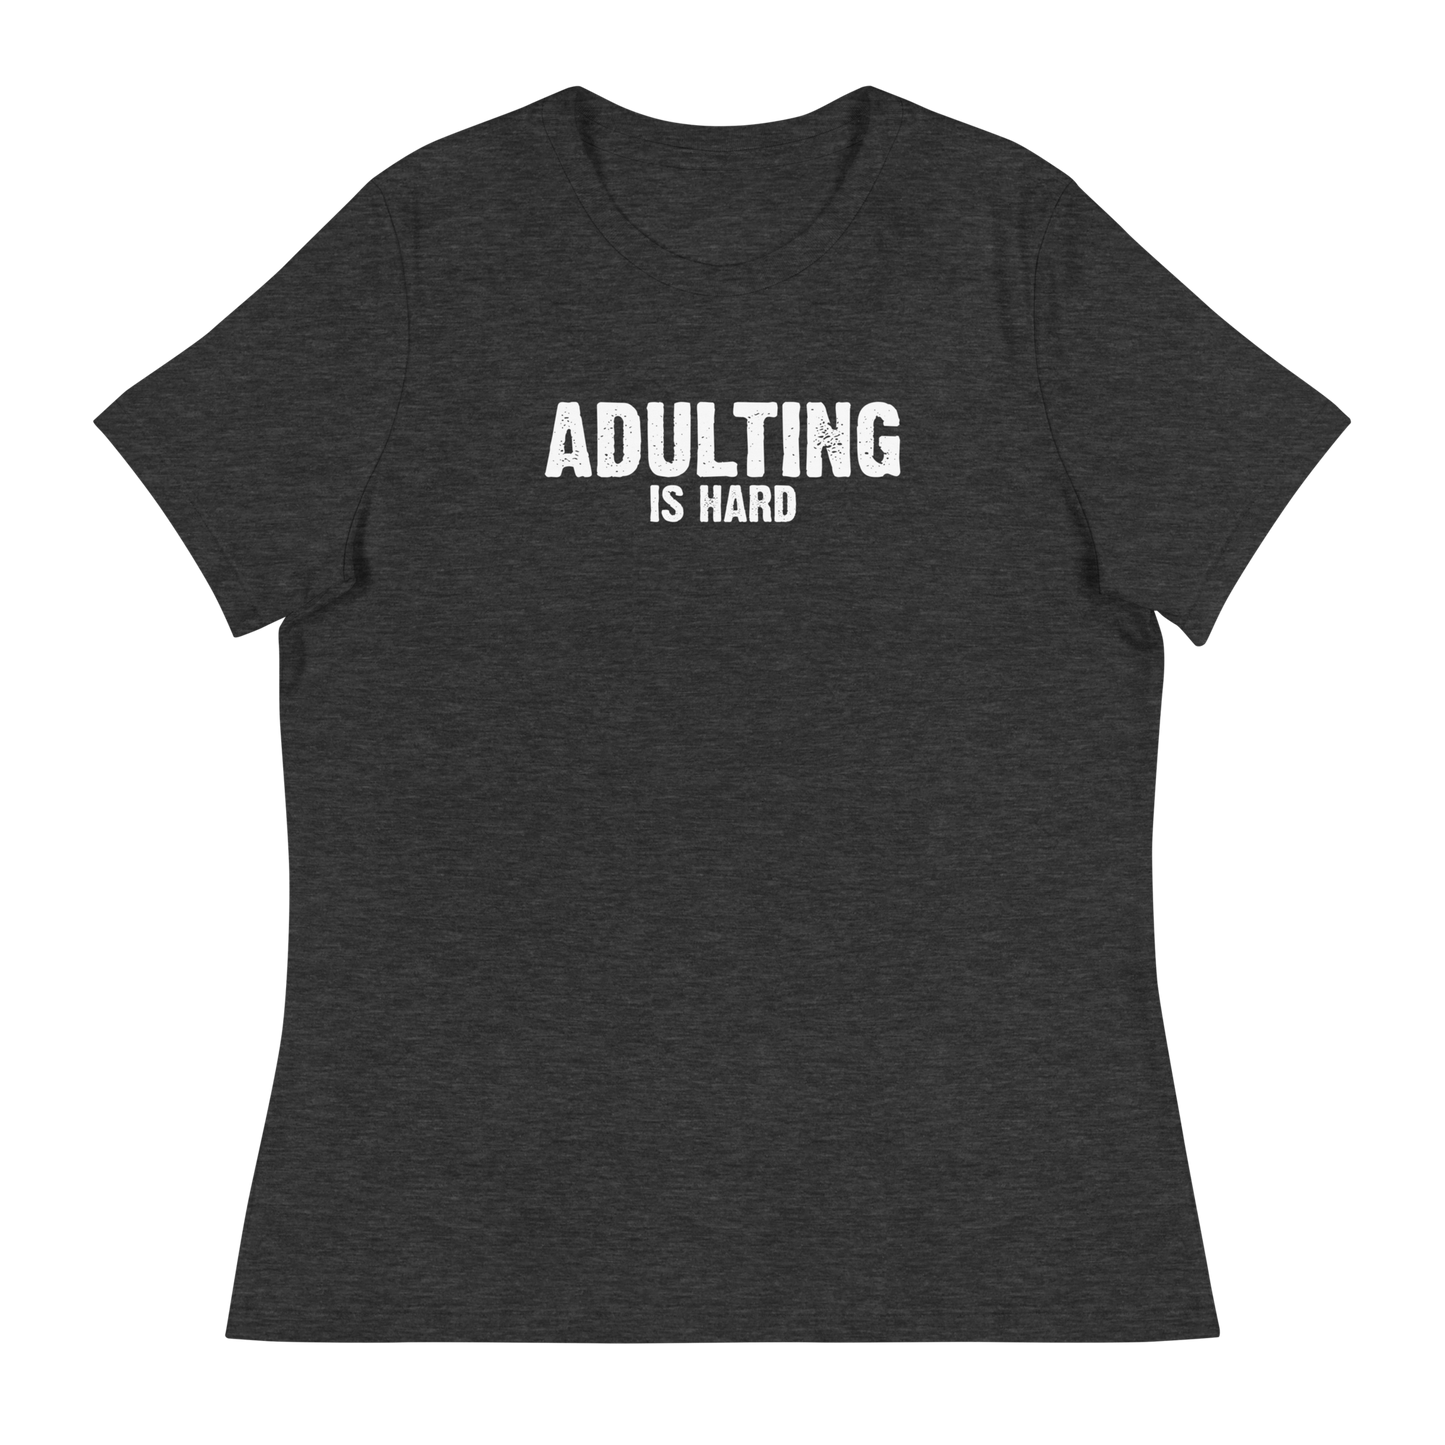 Women's - Adulting Is Hard - Funny T-Shirt